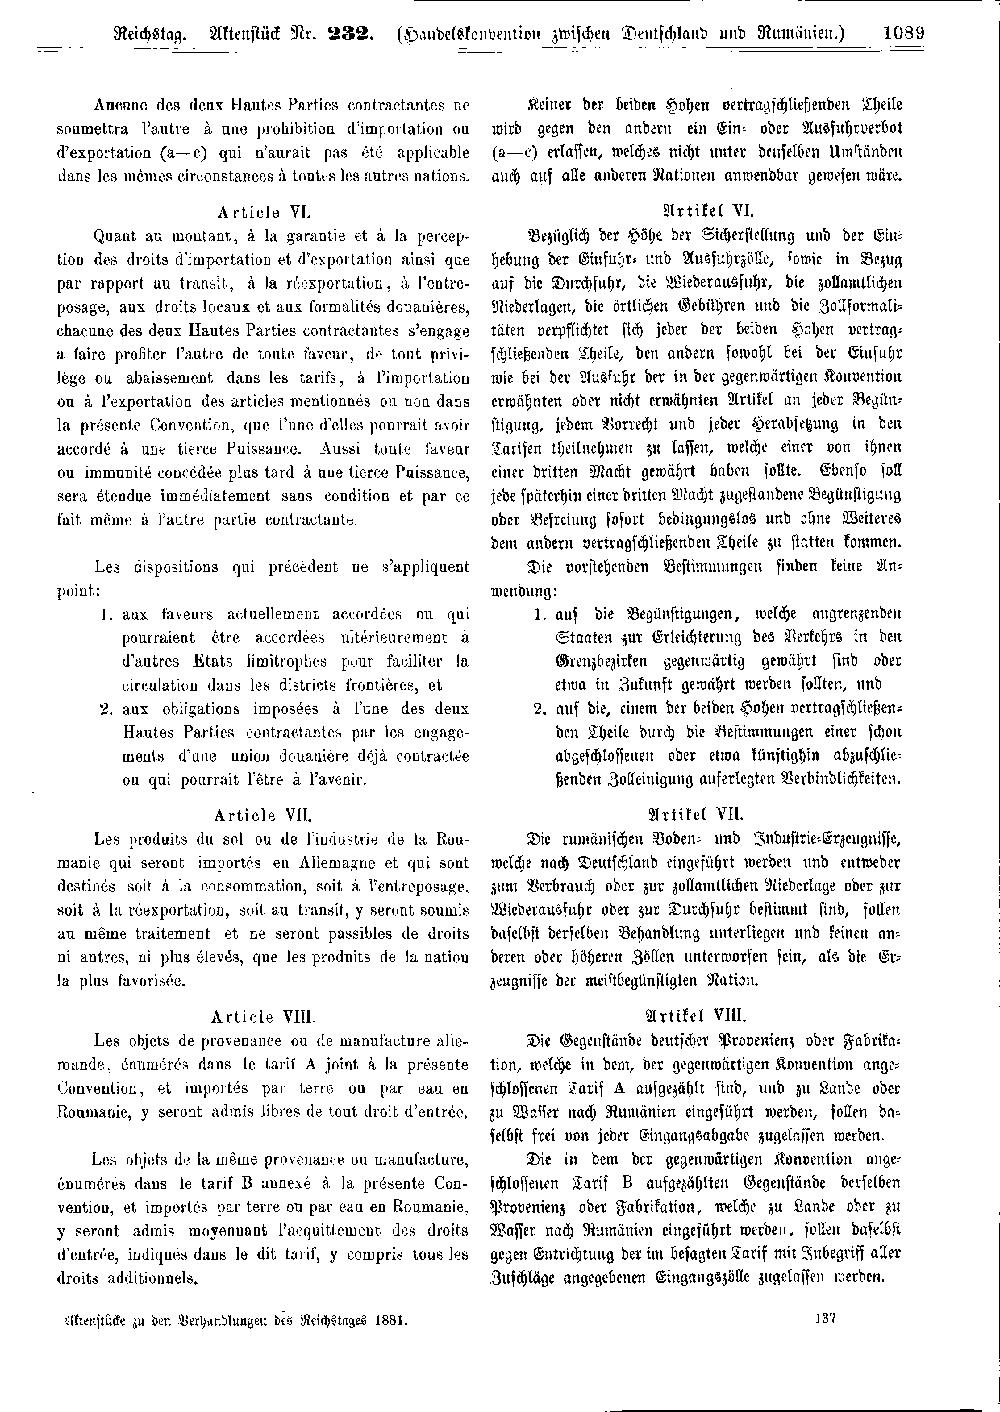 Scan of page 1089